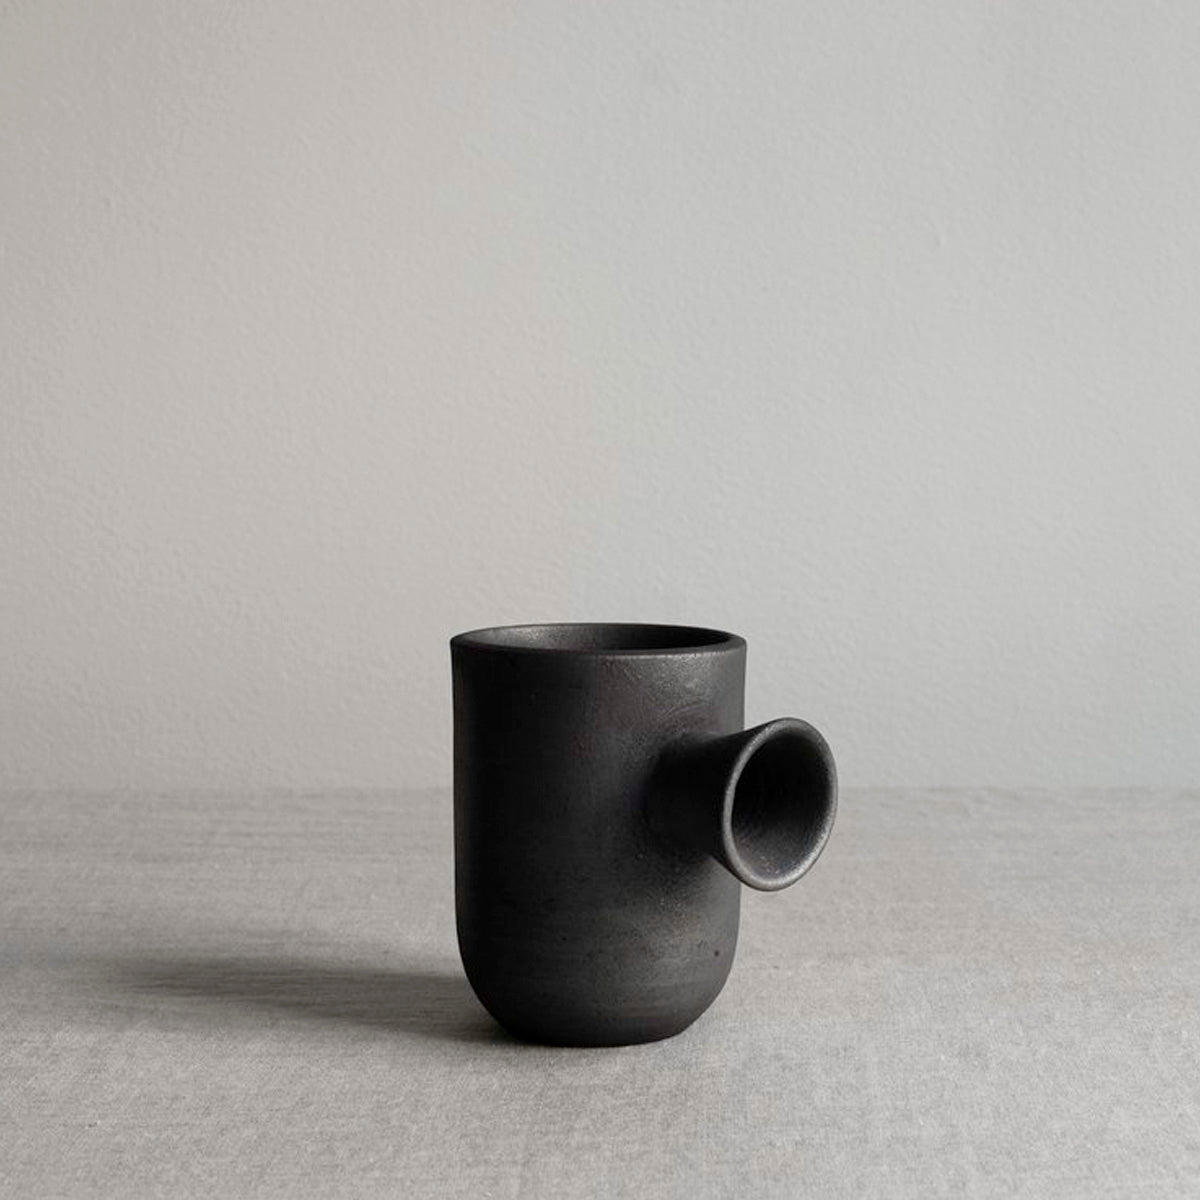 Origin Made Charred Vases Cup　オブジェ  ポルトガル  花瓶